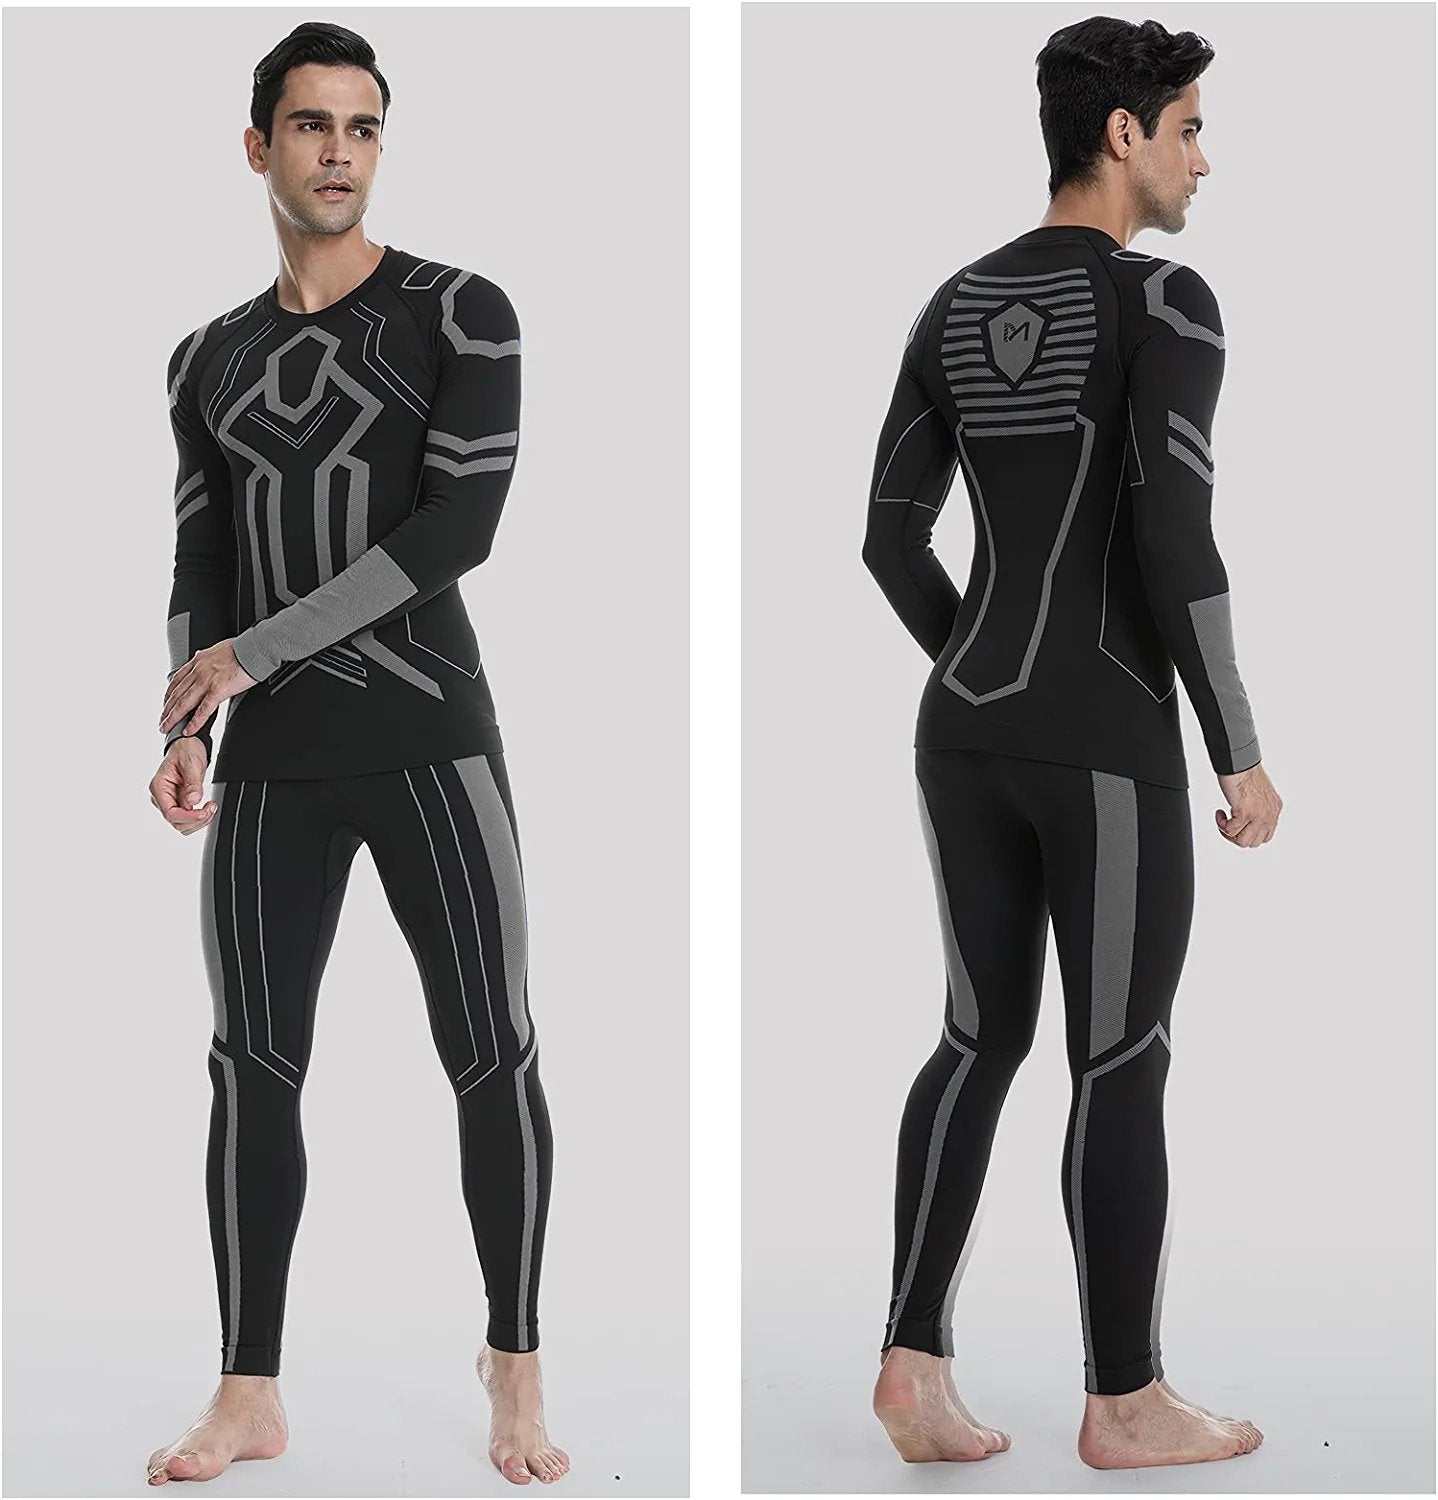 Men's Winter Thermal Underwear, Long Johns Bottoms For Skiing